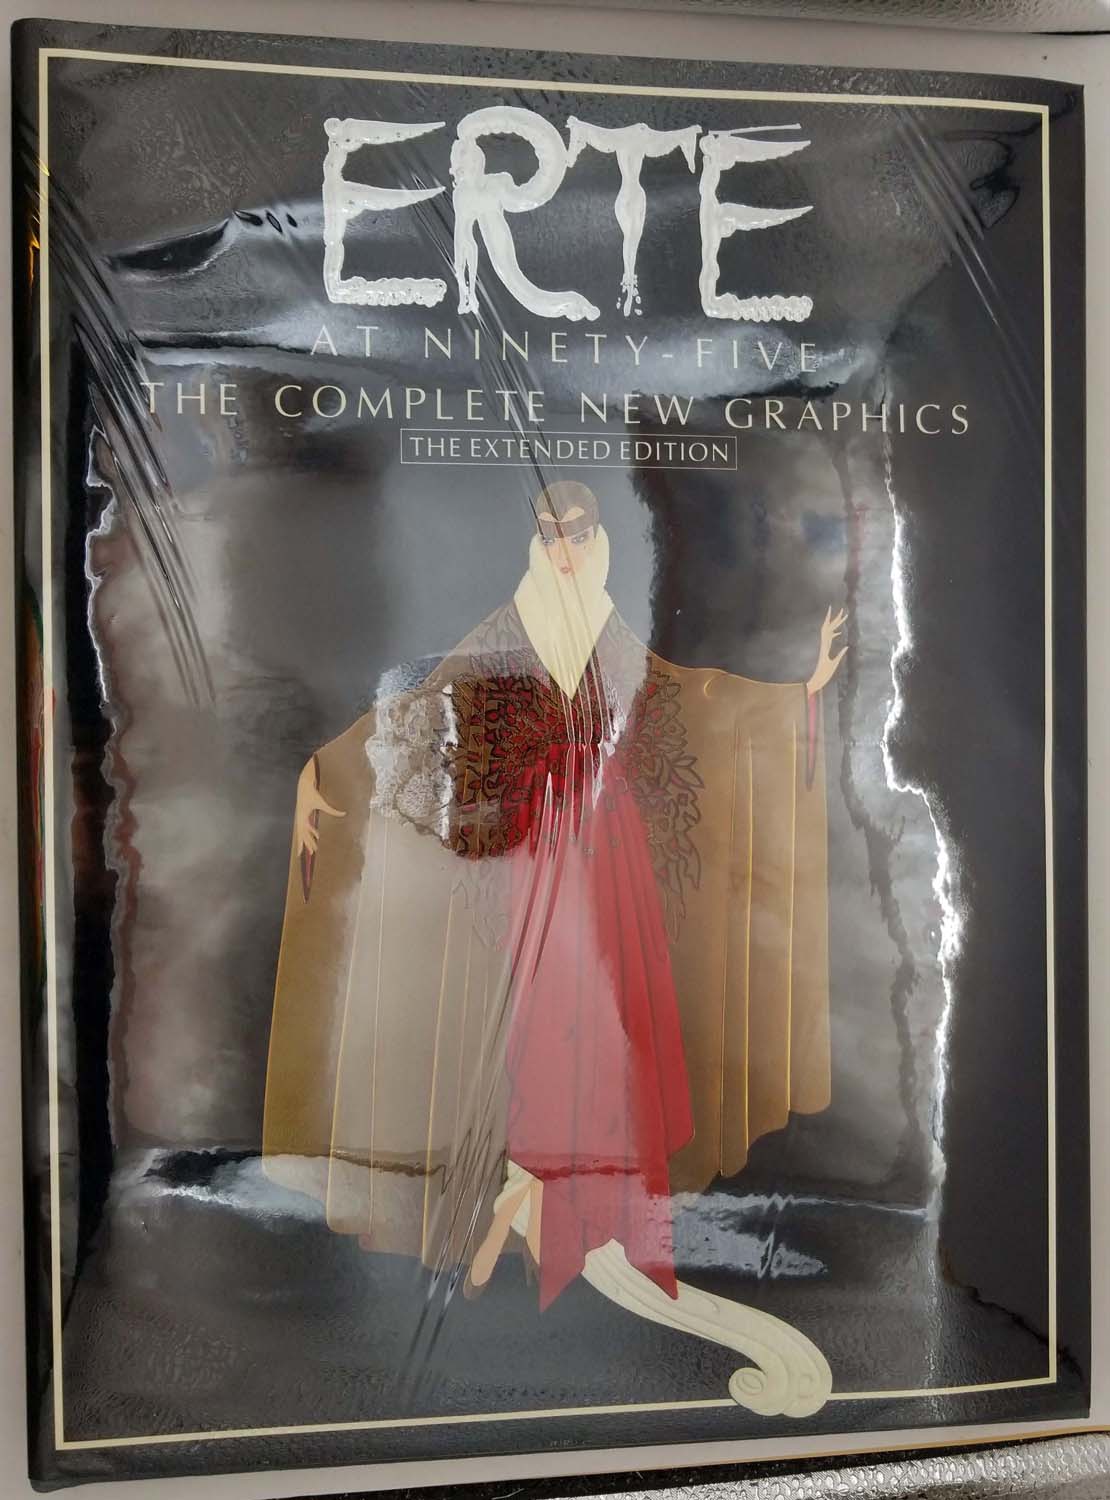 Erte at Ninety-Five: The Complete New Graphics, Extended Edition Monograph  1988 | Rare First Edition Books - Golden Age Children's Book Illustrations